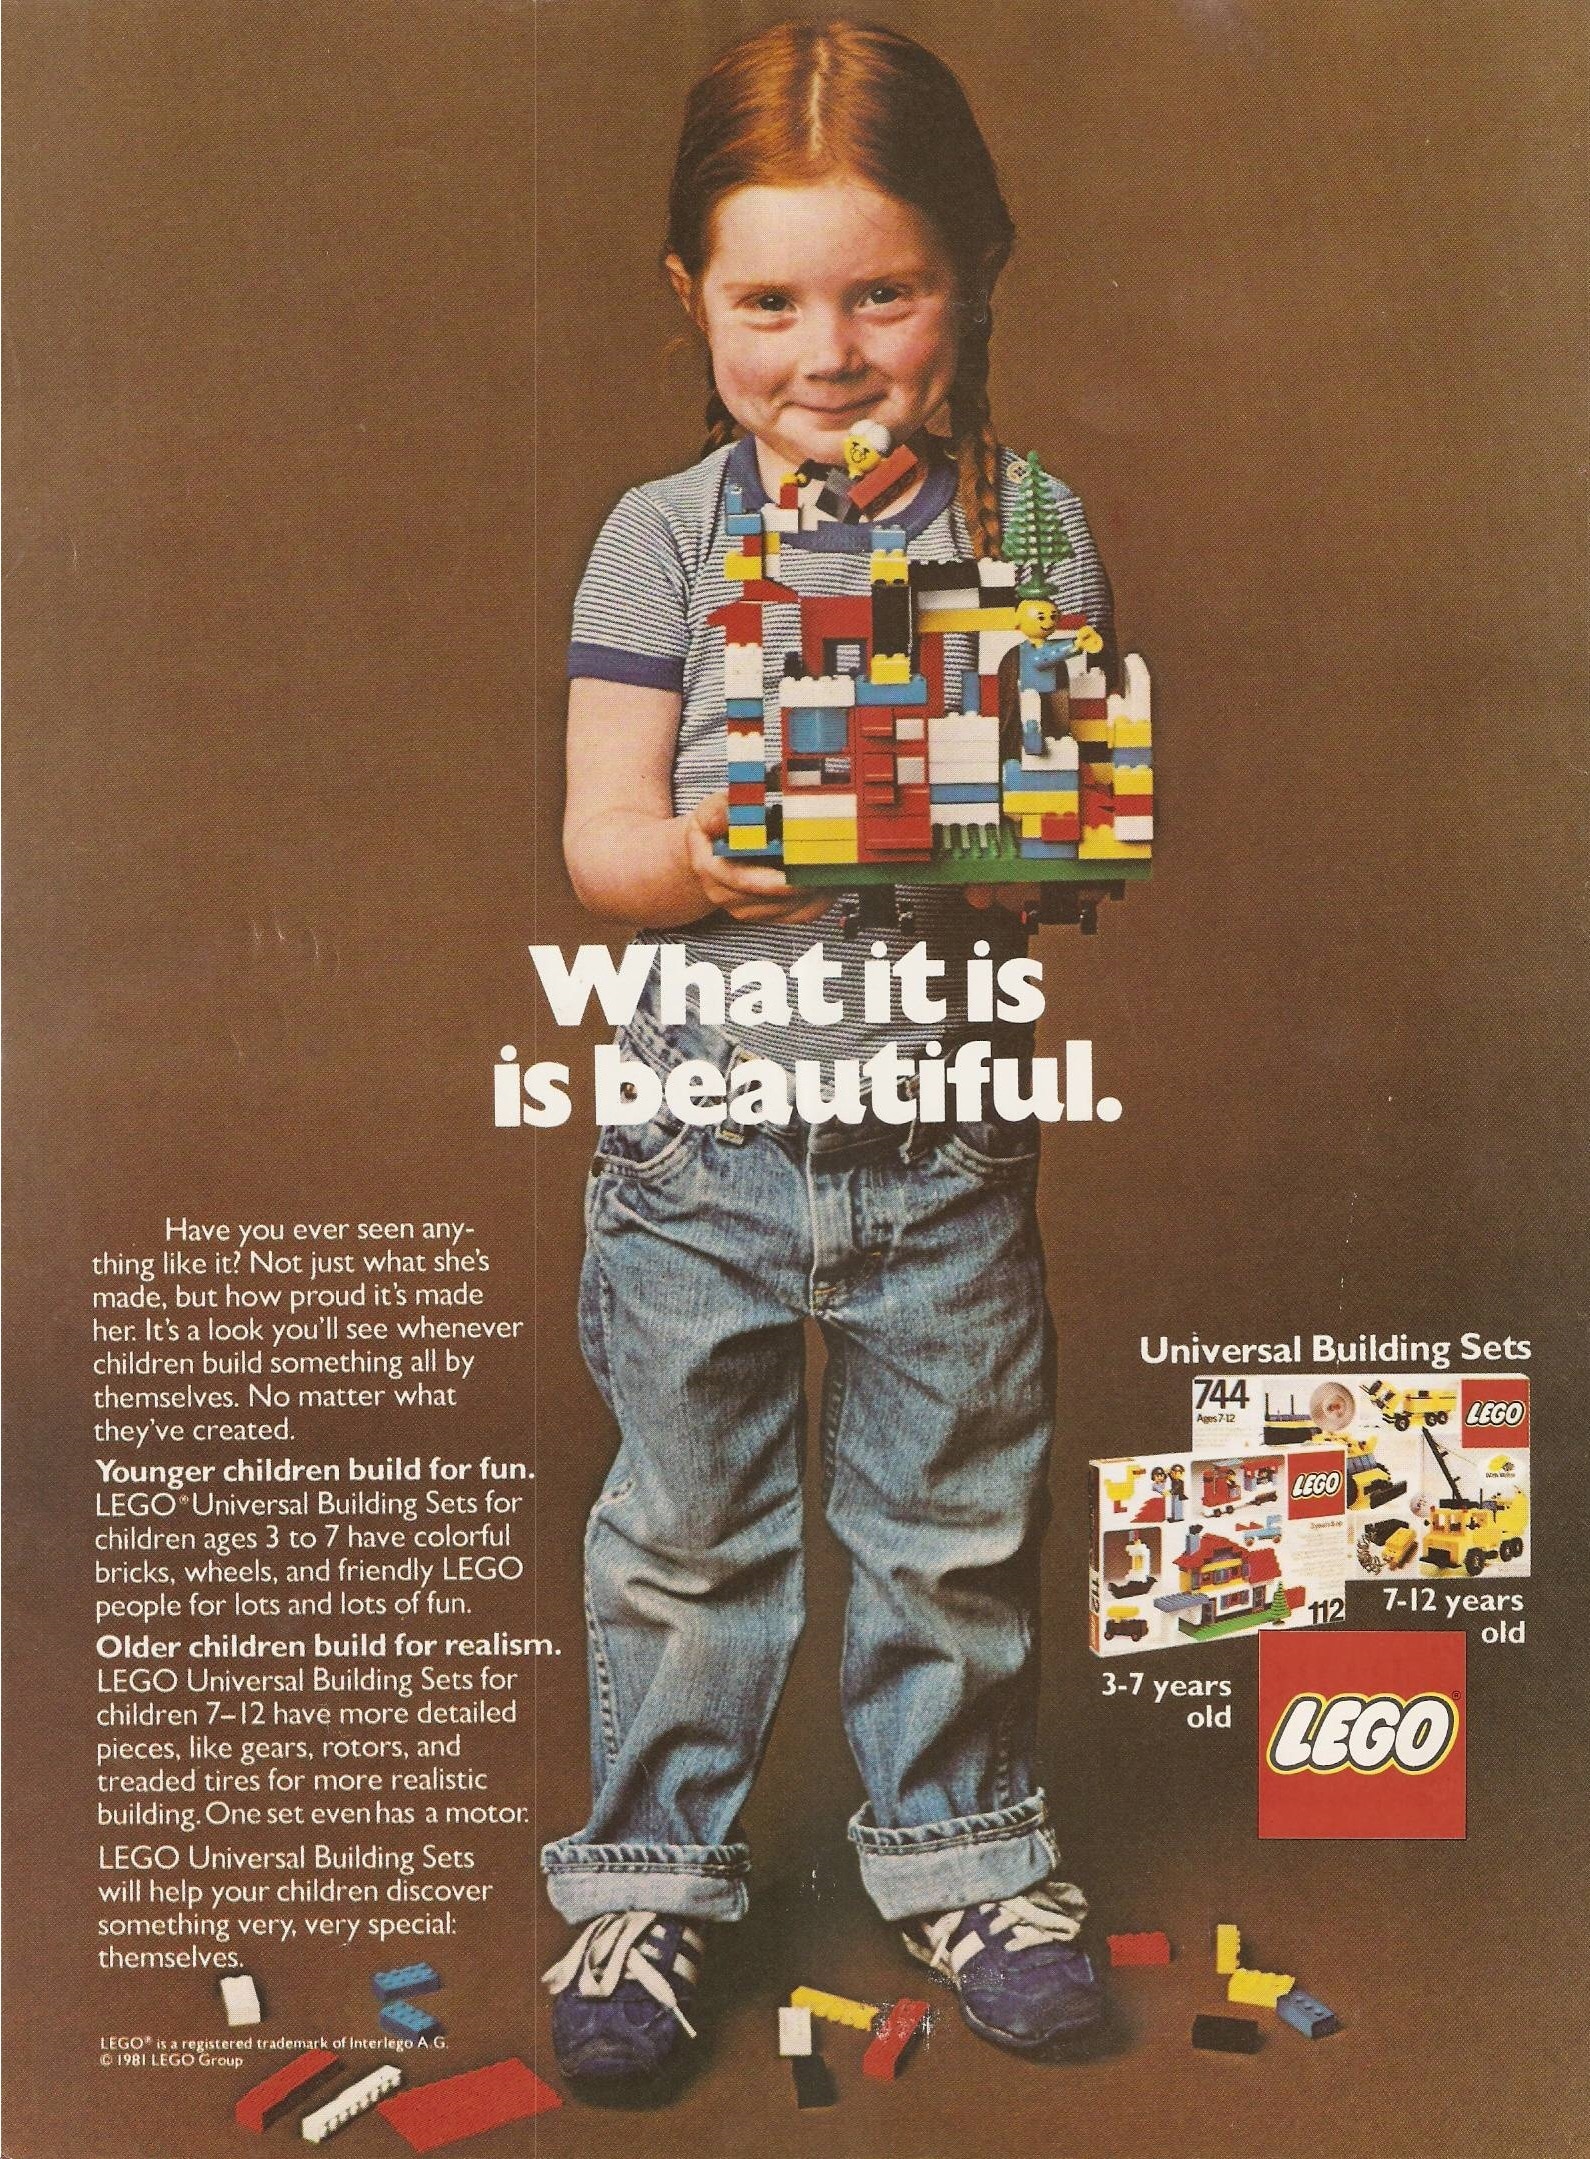 A Lego ad from the early 1980s